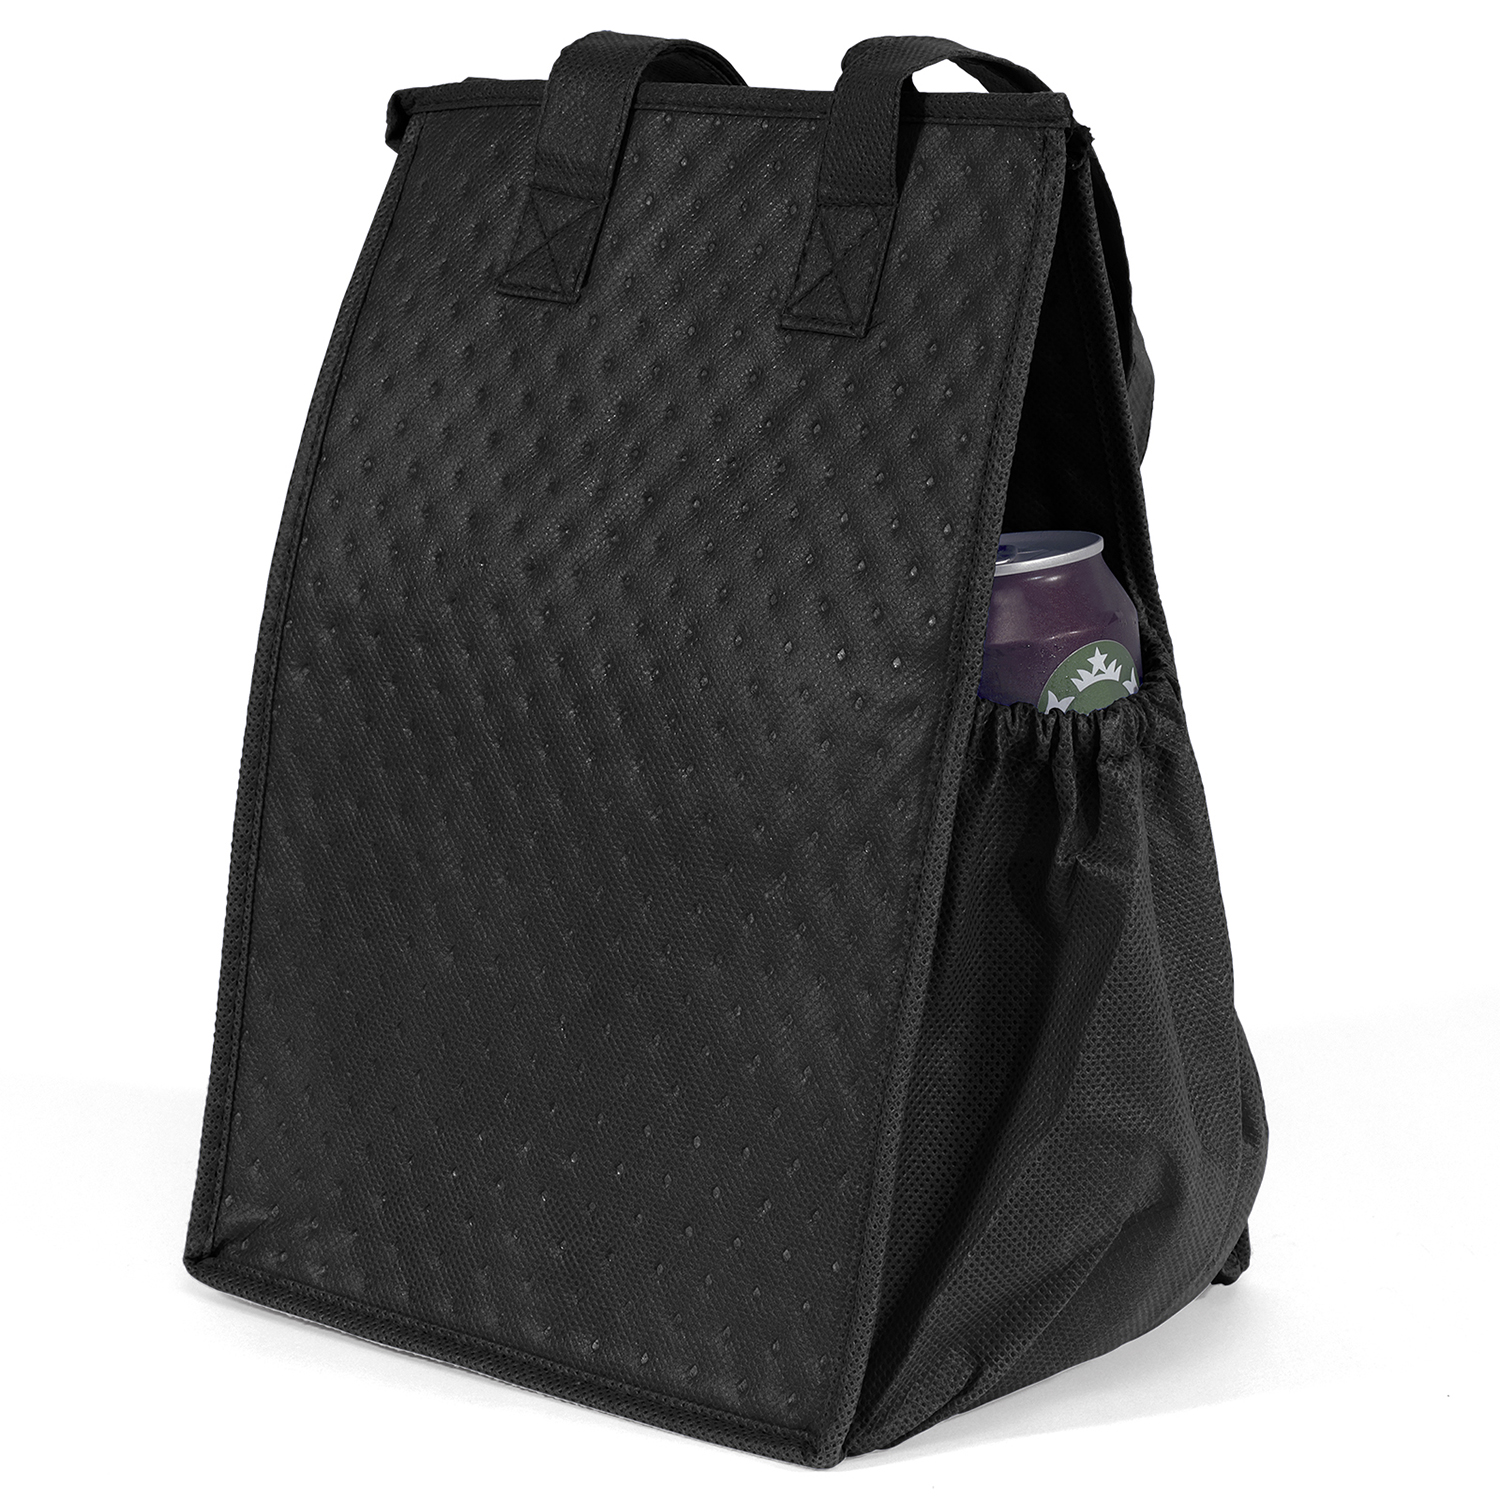 Bag Makers 39AC812 - Custom Printed Eco-Friendly Insulated Promotional Non-Woven Snack Tote